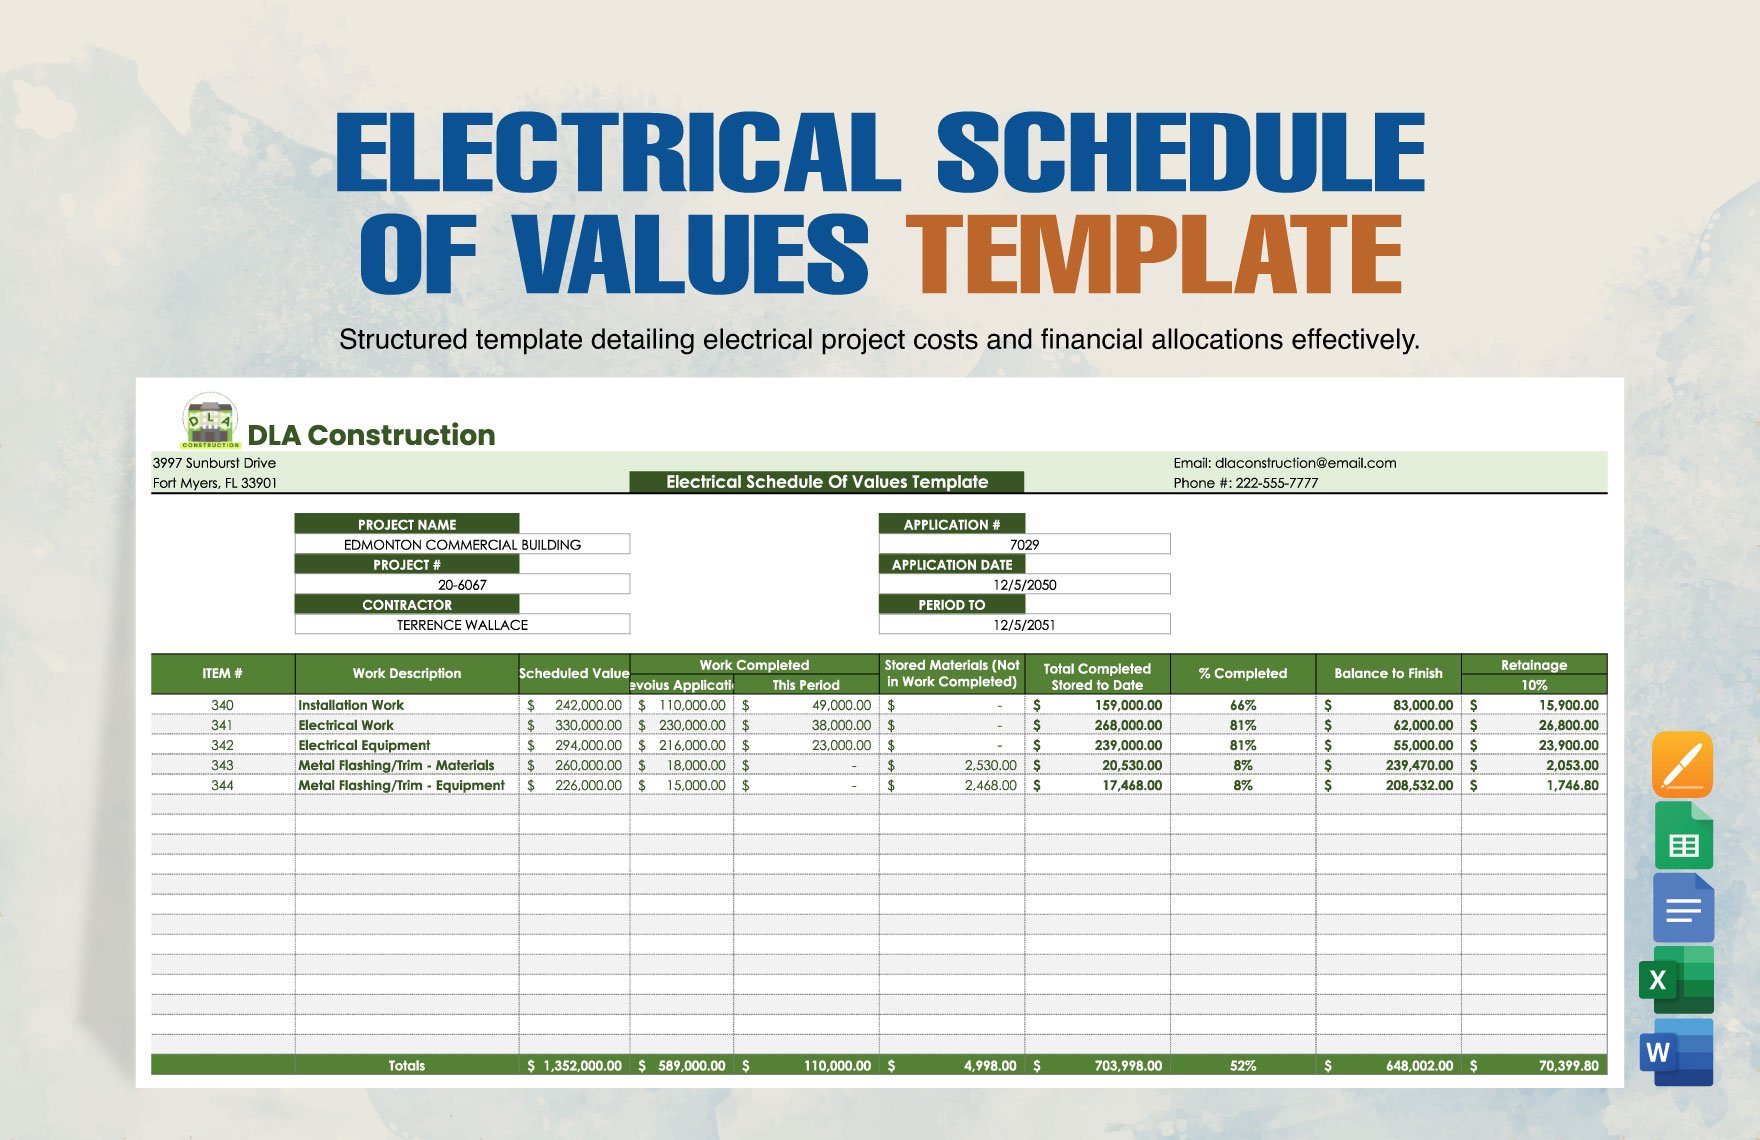 Electrical Schedule Of Values Template in Word, Google Docs, Excel, Google Sheets, Apple Pages